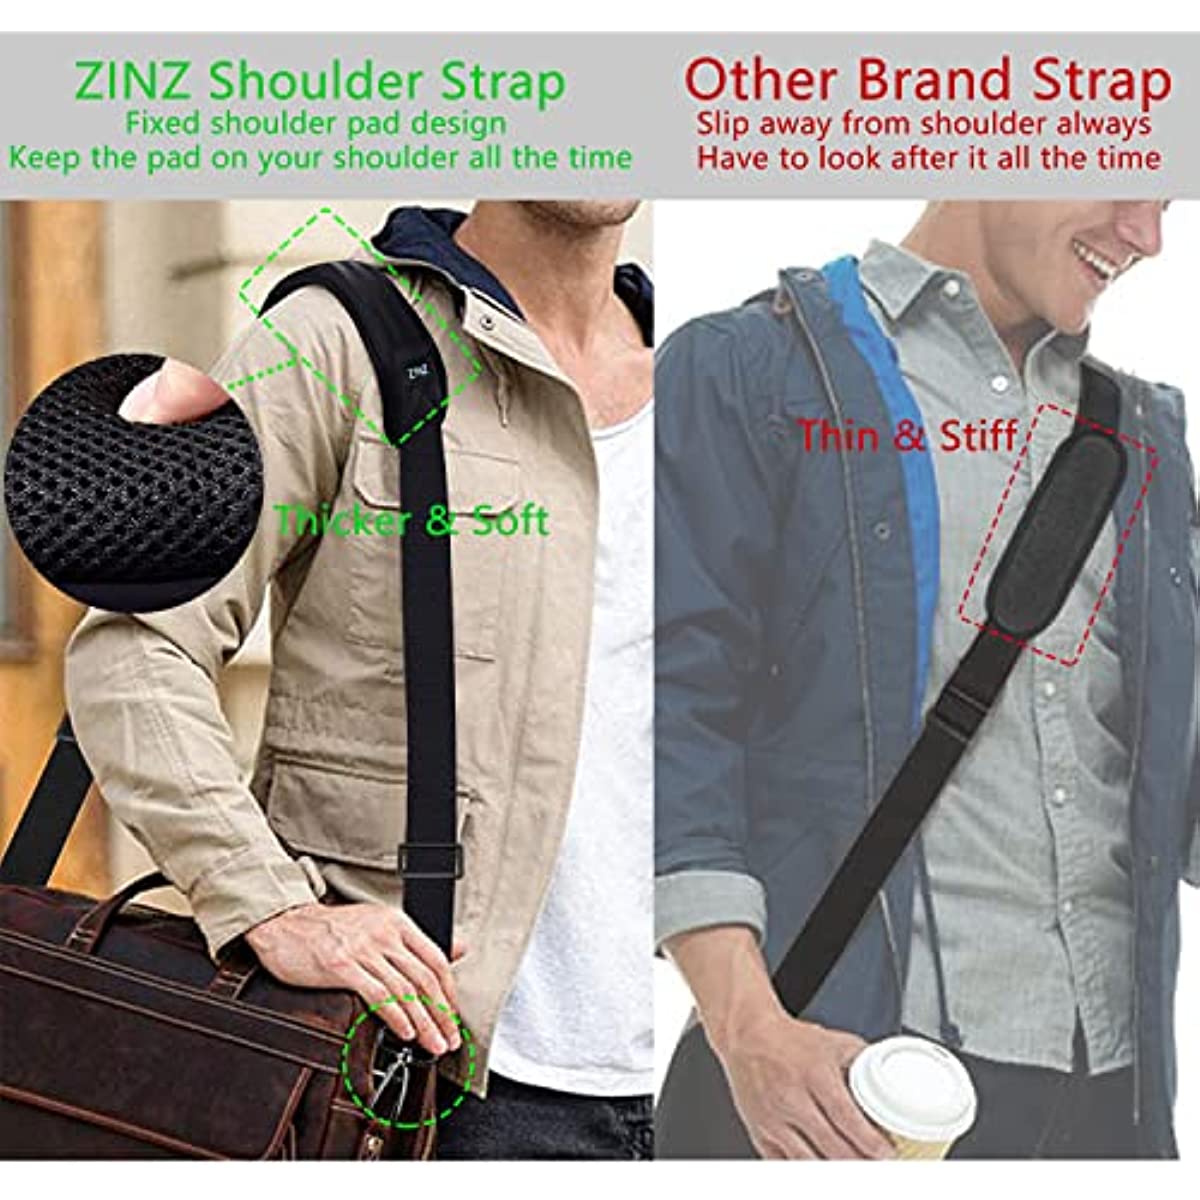 79 inch Universal Replacement Strap with Extra-thick Fixed Cushion Pad and Dual Claspsfor Laptop Bags, Luggage Bags, Camera, Crossbody (200cm)